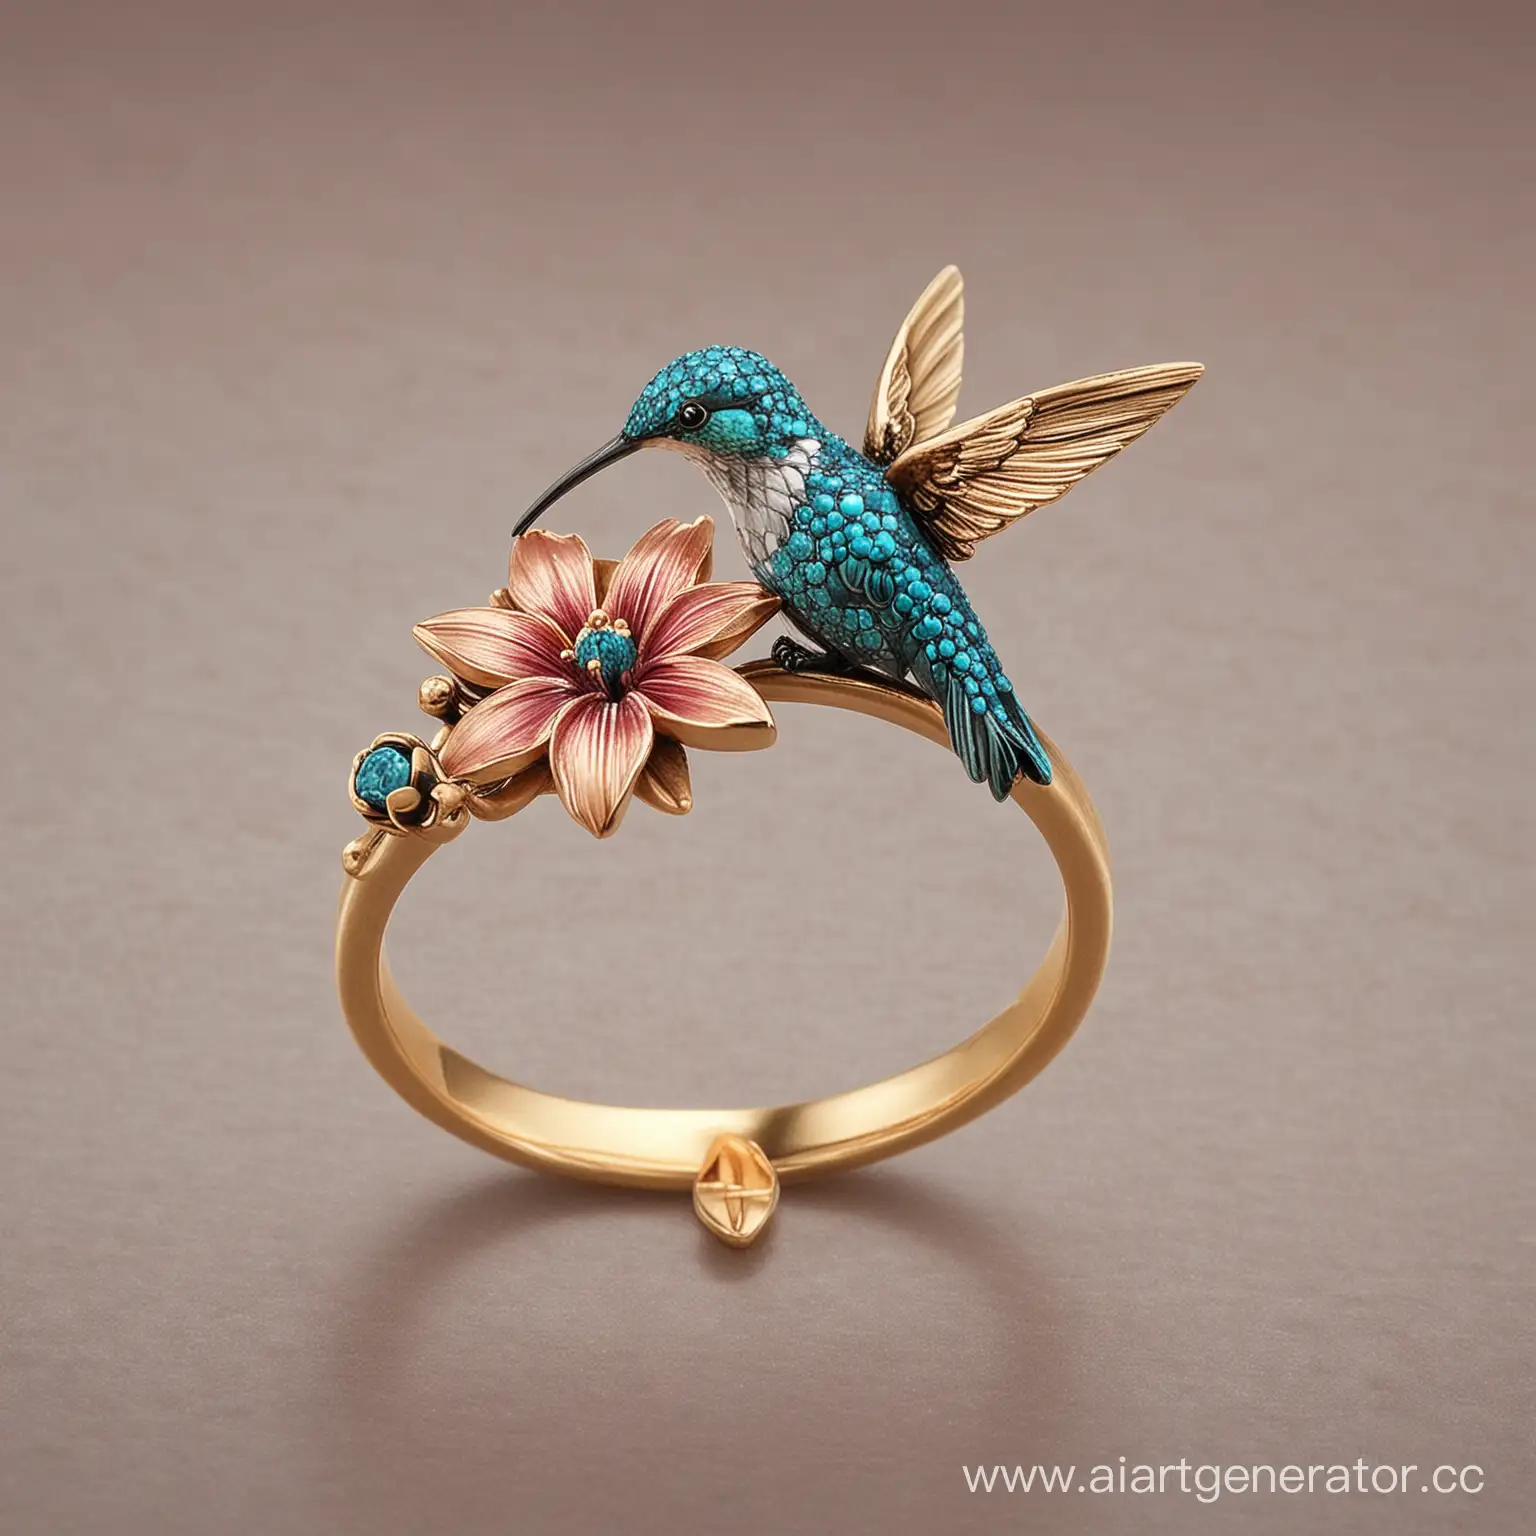 Hummingbird-Ring-with-Blossoming-Flower